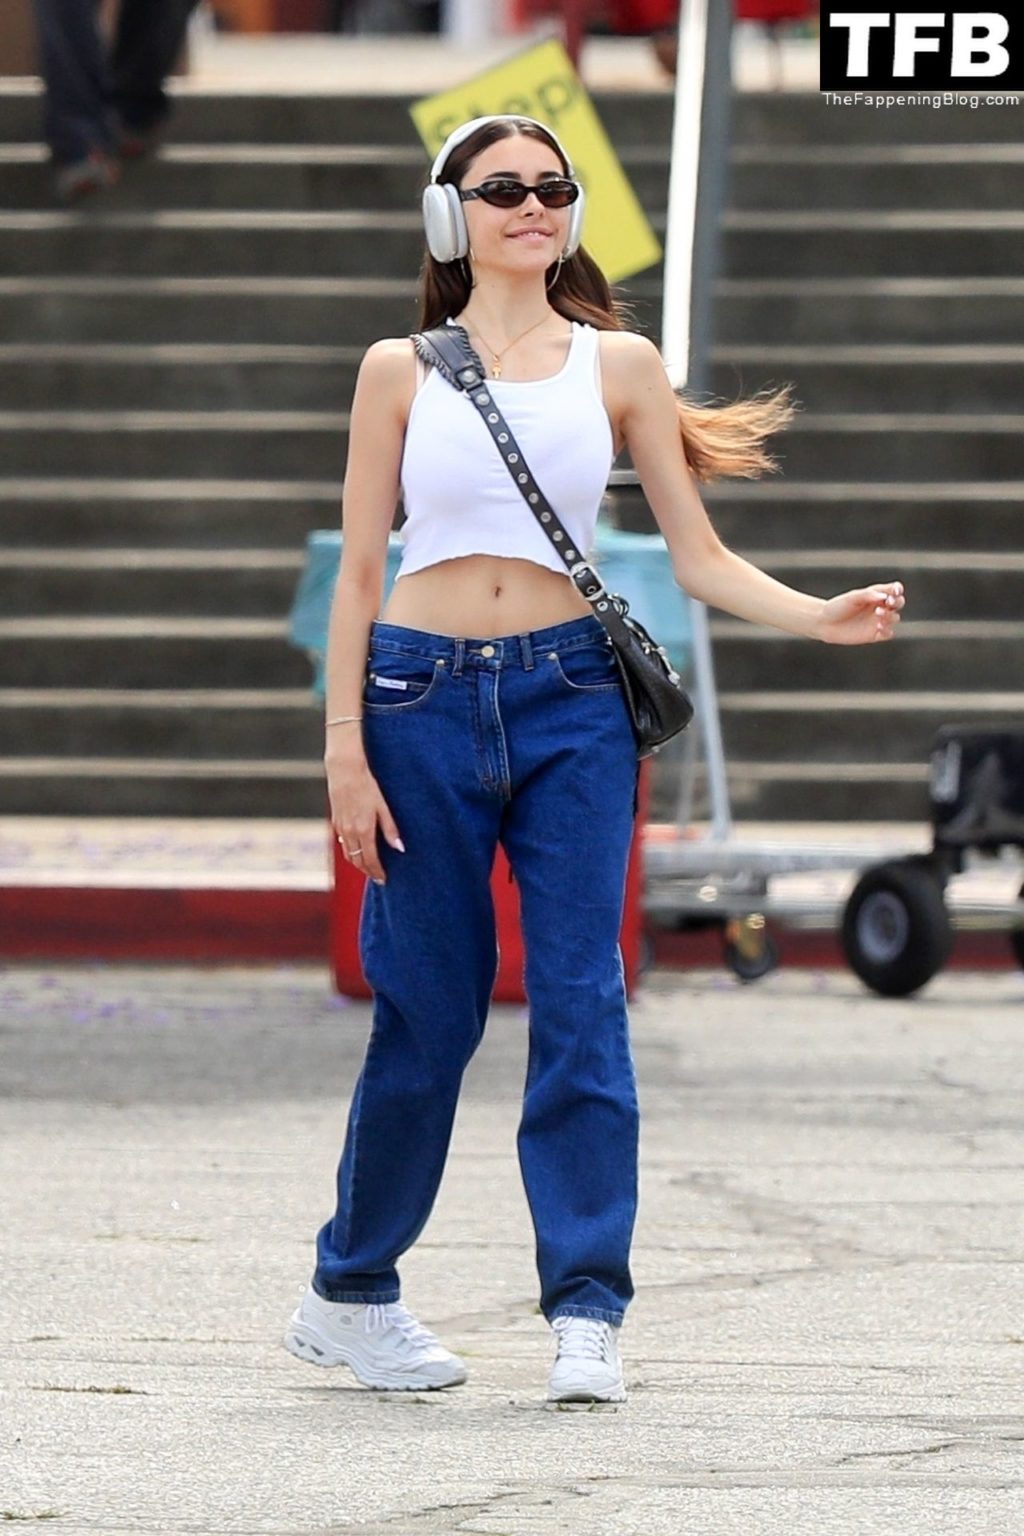 Madison Beer Sexy The Fappening Blog 8 1 1024x1536 - Madison Beer Wears a Tiny Crop Top Revealing a Toned Waist While Shopping in LA (39 Photos)